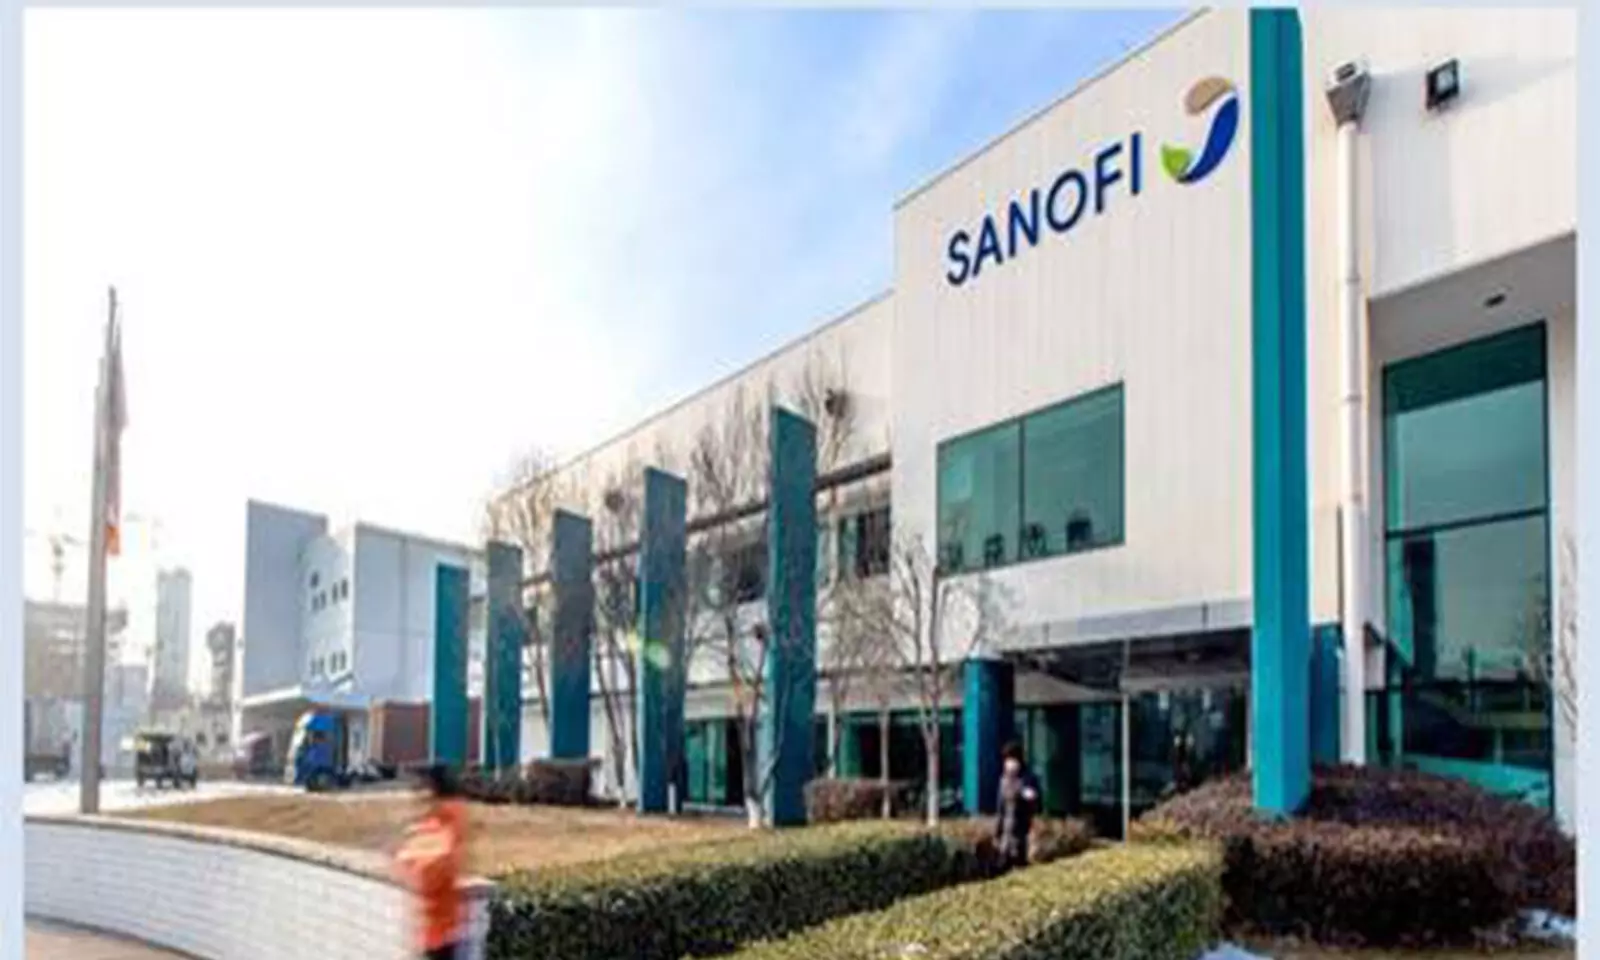 Sanofi wins EU approval for Dupixent for atopic dermatitis in children